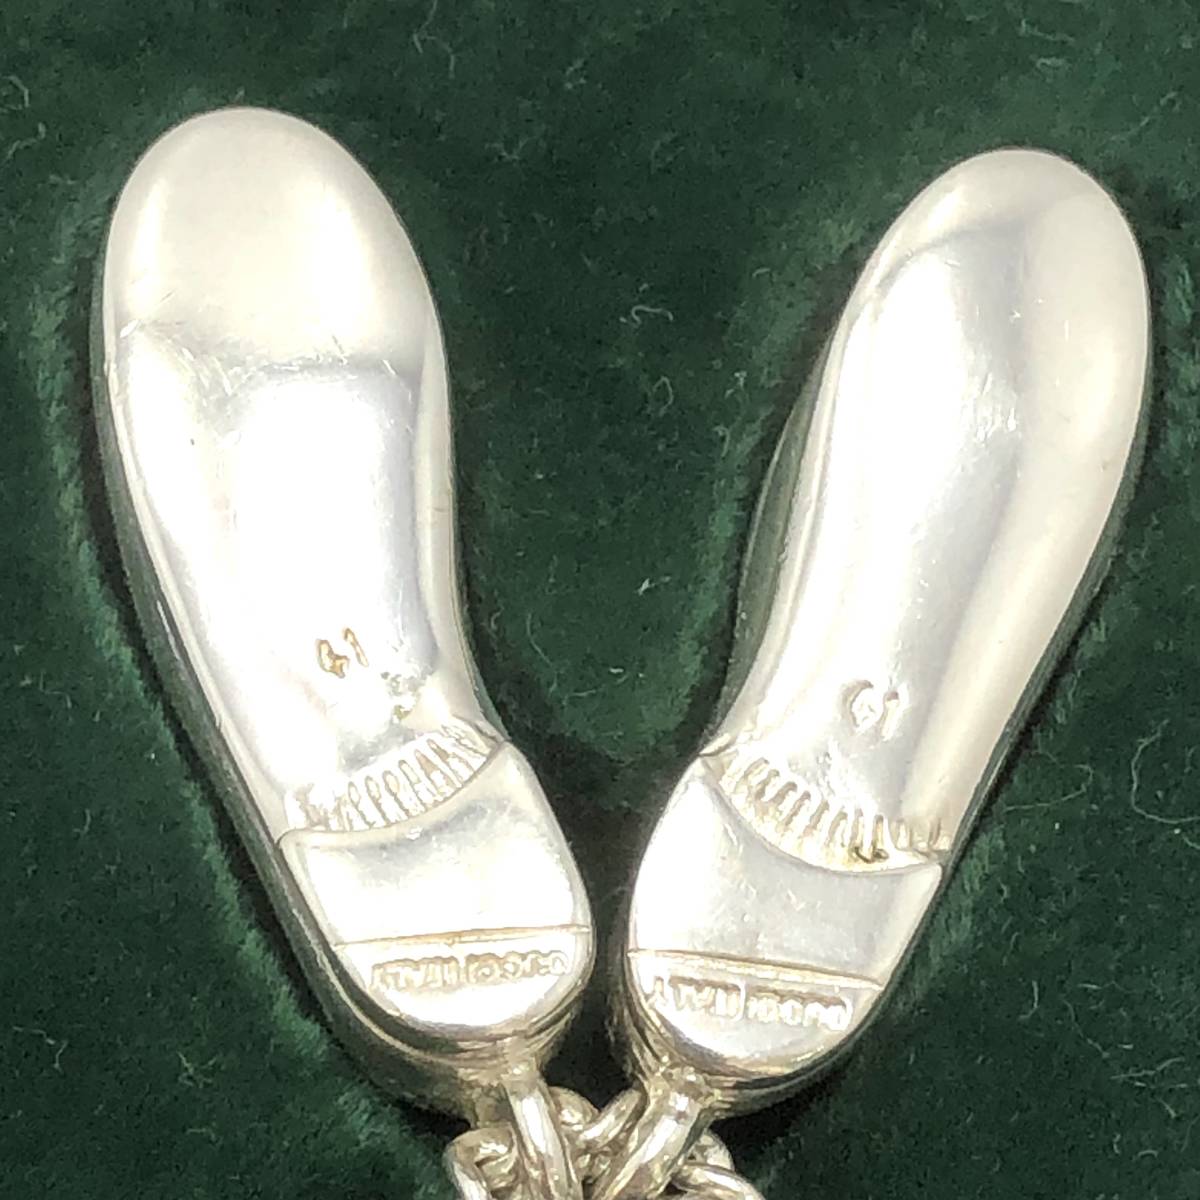  Gucci GUCCI Old Gucci bit Loafer double key holder shoes motif Vintage man and woman use accessory 